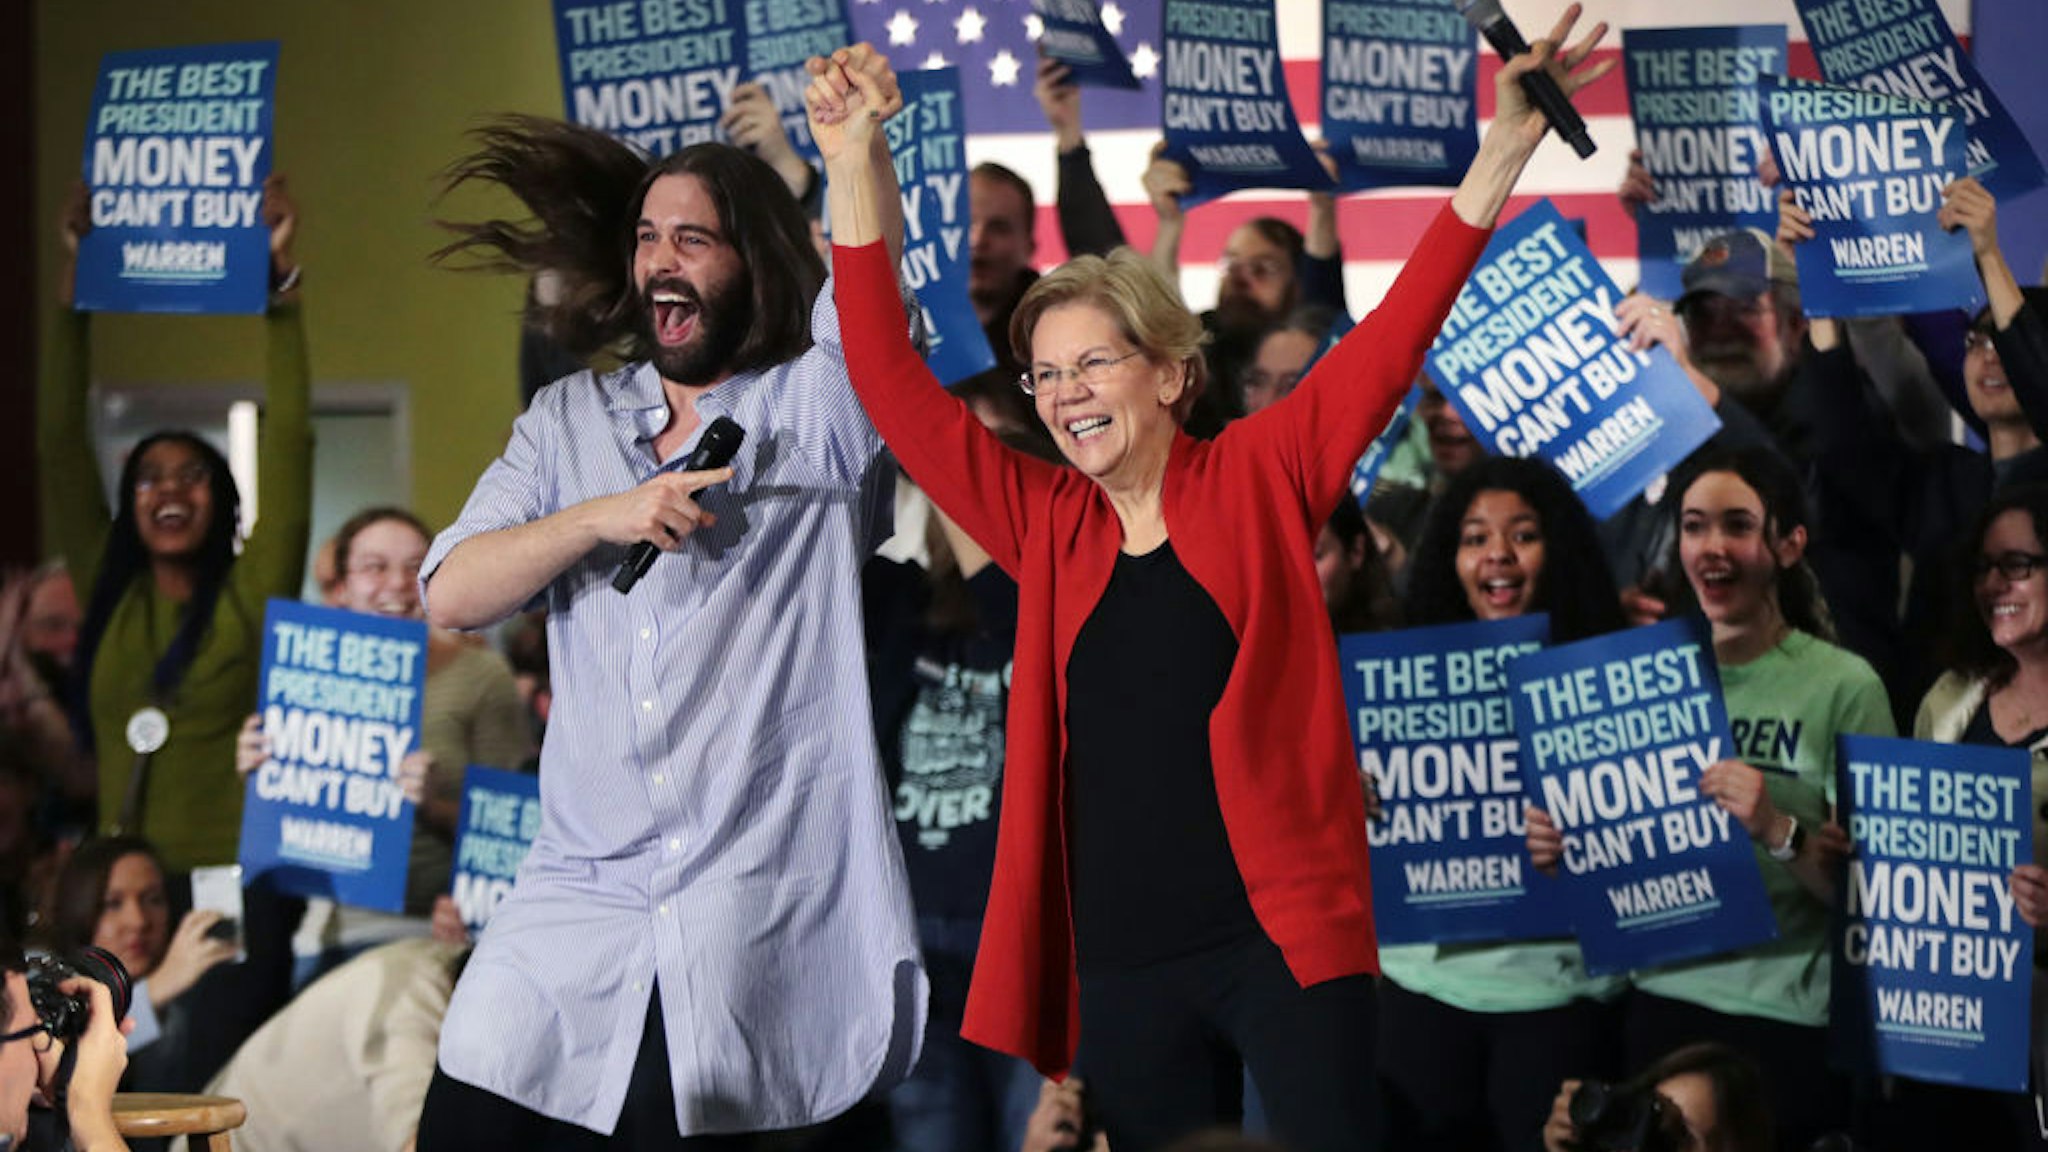 Jonathan Van Ness, of the Netflix series Queer Eye, introduces Democratic presidential candidate, Sen. Elizabeth Warren (D-MA) during a campaign rally at The NewBo City Market on January 26, 2020 in Cedar Rapids, Iowa.